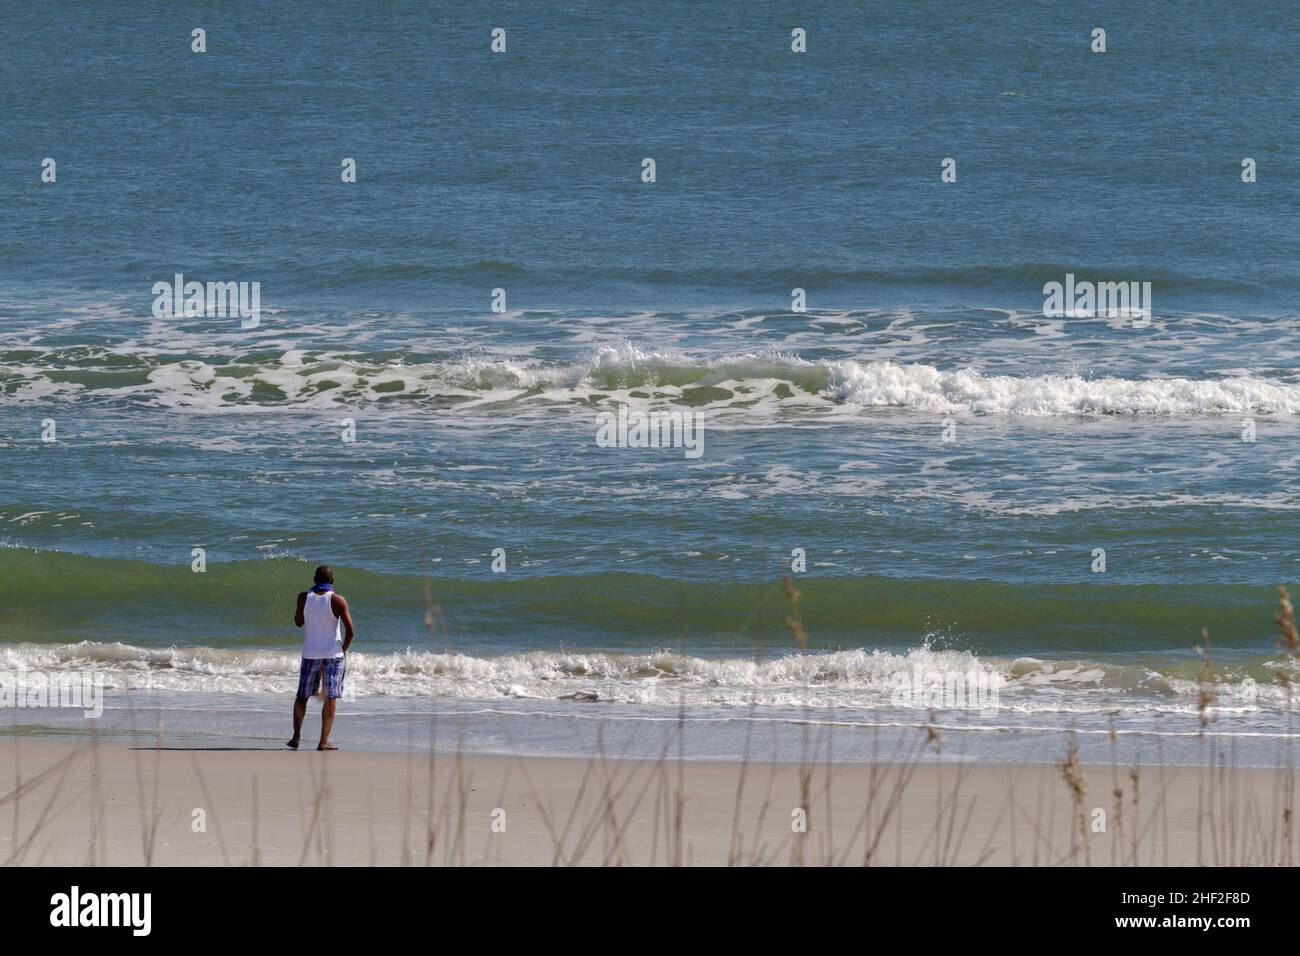 A black man stands alone on a beach looking out at the vast and restless sea Stock Photo